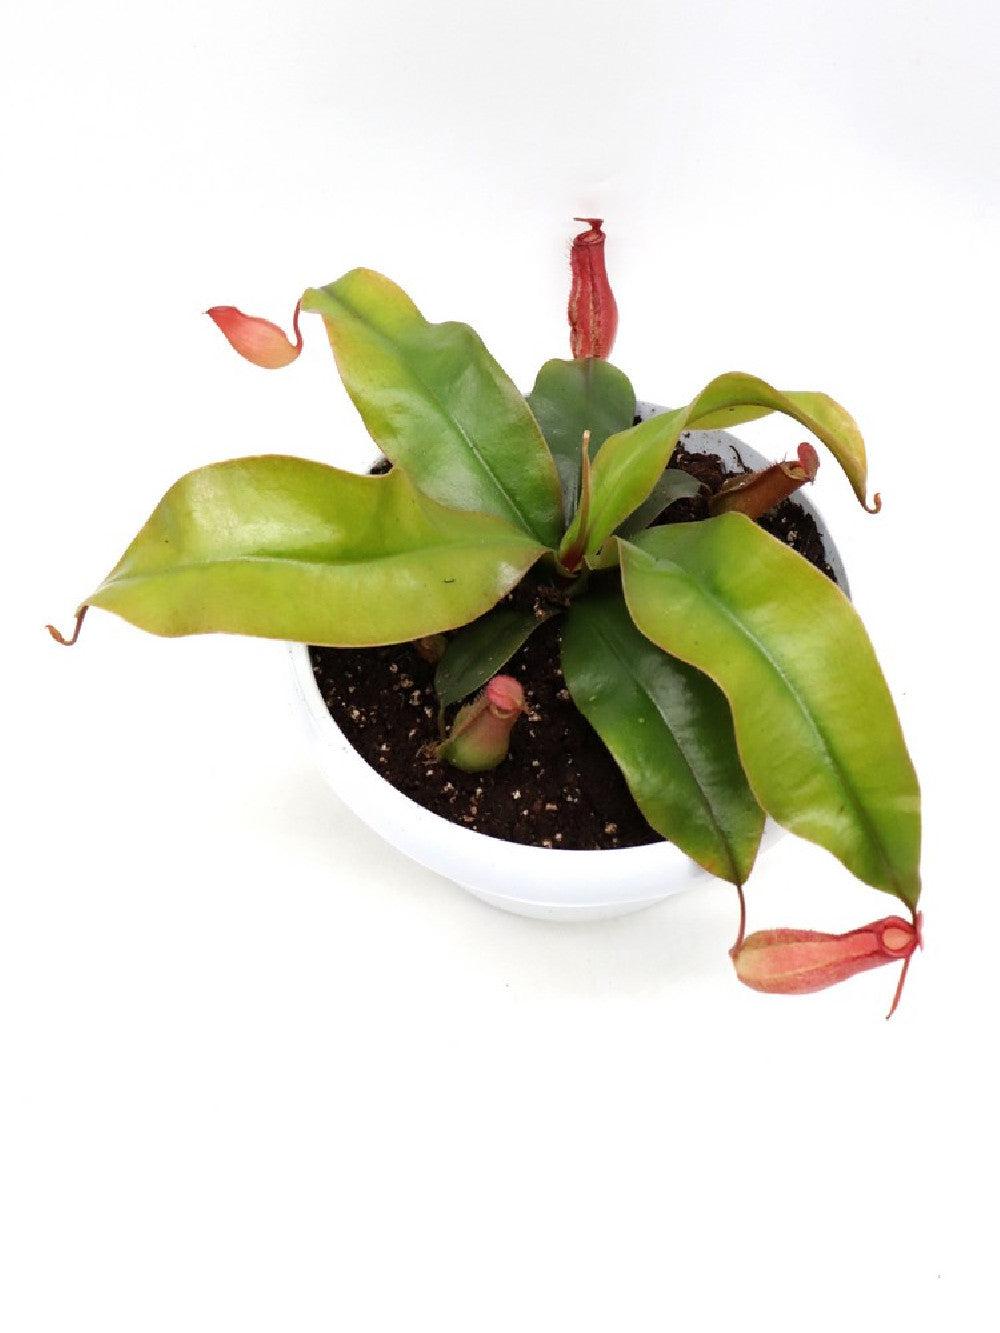 Tris carnivoro  Nepenthes "Bloody mary"